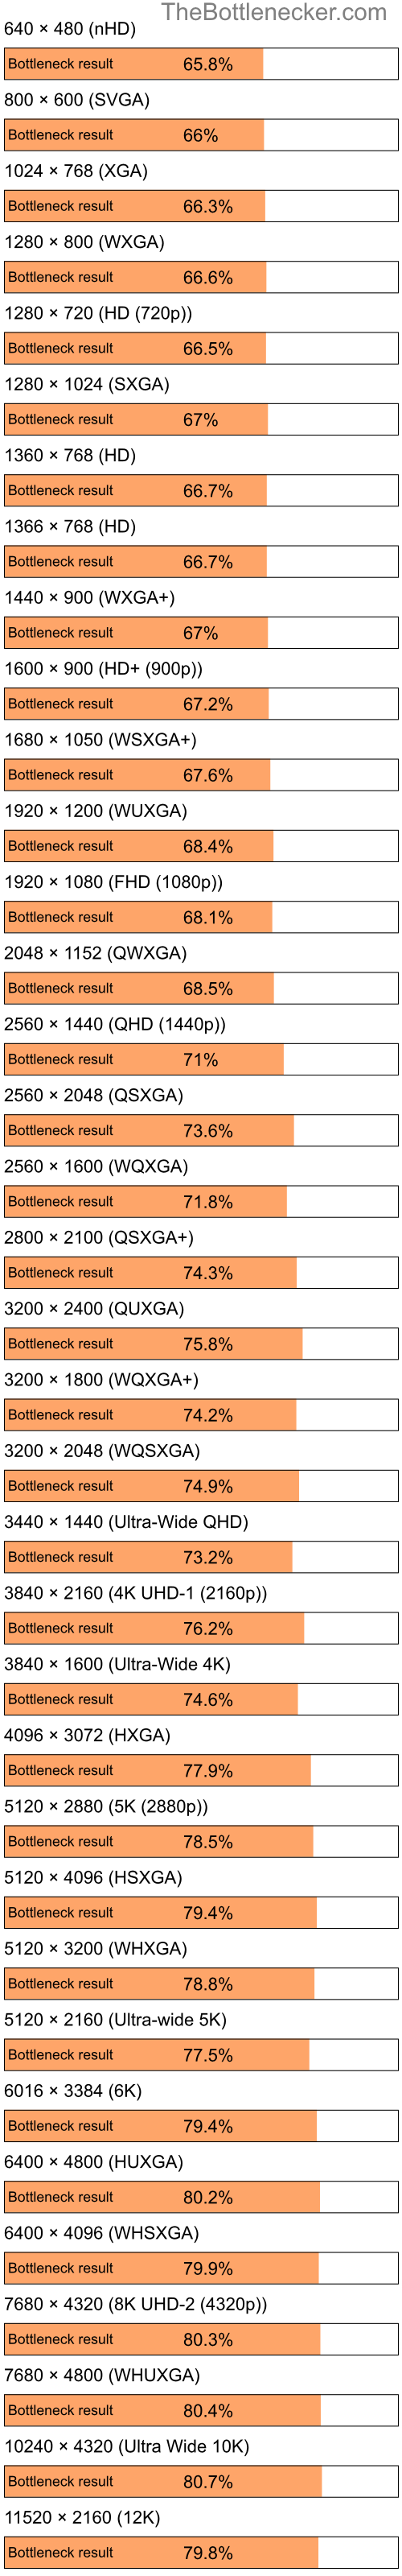 Bottleneck results by resolution for Intel Celeron and AMD Mobility Radeon X2300 in Processor Intense Tasks